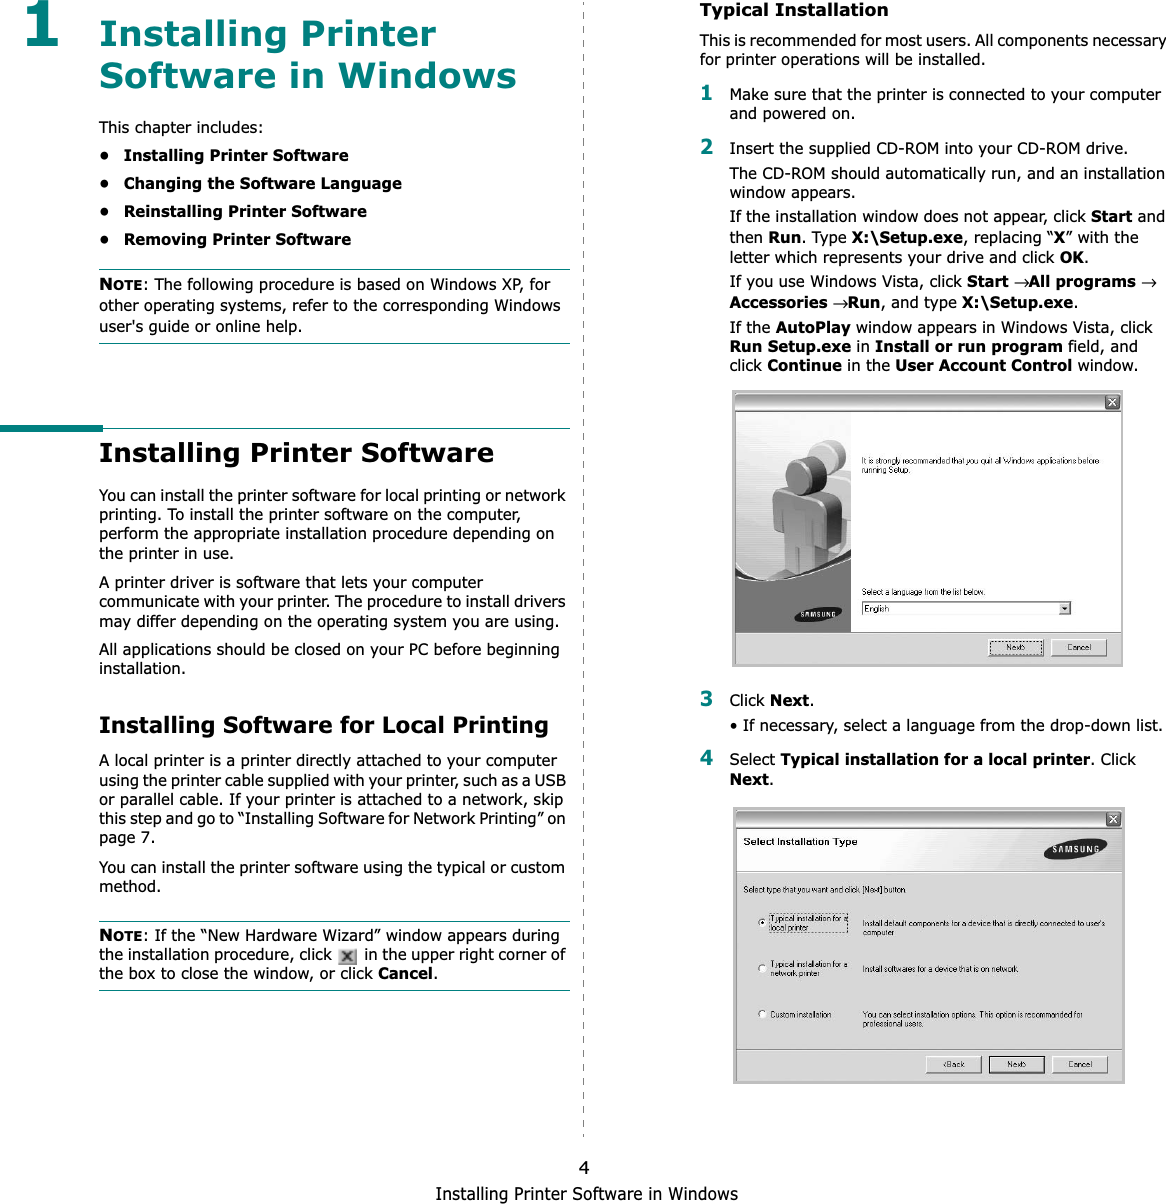 Installing Printer Software in Windows41Installing Printer Software in WindowsThis chapter includes:• Installing Printer Software• Changing the Software Language• Reinstalling Printer Software• Removing Printer SoftwareNOTE: The following procedure is based on Windows XP, for other operating systems, refer to the corresponding Windows user&apos;s guide or online help.Installing Printer SoftwareYou can install the printer software for local printing or network printing. To install the printer software on the computer, perform the appropriate installation procedure depending on the printer in use.A printer driver is software that lets your computer communicate with your printer. The procedure to install drivers may differ depending on the operating system you are using.All applications should be closed on your PC before beginning installation. Installing Software for Local PrintingA local printer is a printer directly attached to your computer using the printer cable supplied with your printer, such as a USB or parallel cable. If your printer is attached to a network, skip this step and go to “Installing Software for Network Printing” on page 7.You can install the printer software using the typical or custom method.NOTE: If the “New Hardware Wizard” window appears during the installation procedure, click   in the upper right corner of the box to close the window, or click Cancel.Typical InstallationThis is recommended for most users. All components necessary for printer operations will be installed.1Make sure that the printer is connected to your computer and powered on.2Insert the supplied CD-ROM into your CD-ROM drive.The CD-ROM should automatically run, and an installation window appears.If the installation window does not appear, click Start and then Run. Type X:\Setup.exe, replacing “X” with the letter which represents your drive and click OK.If you use Windows Vista, click Start→All programs→ Accessories→Run, and type X:\Setup.exe.If the AutoPlay window appears in Windows Vista, click Run Setup.exe in Install or run program field, and clickContinue in the User Account Control window.3Click Next.• If necessary, select a language from the drop-down list.4Select Typical installation for a local printer. Click Next.